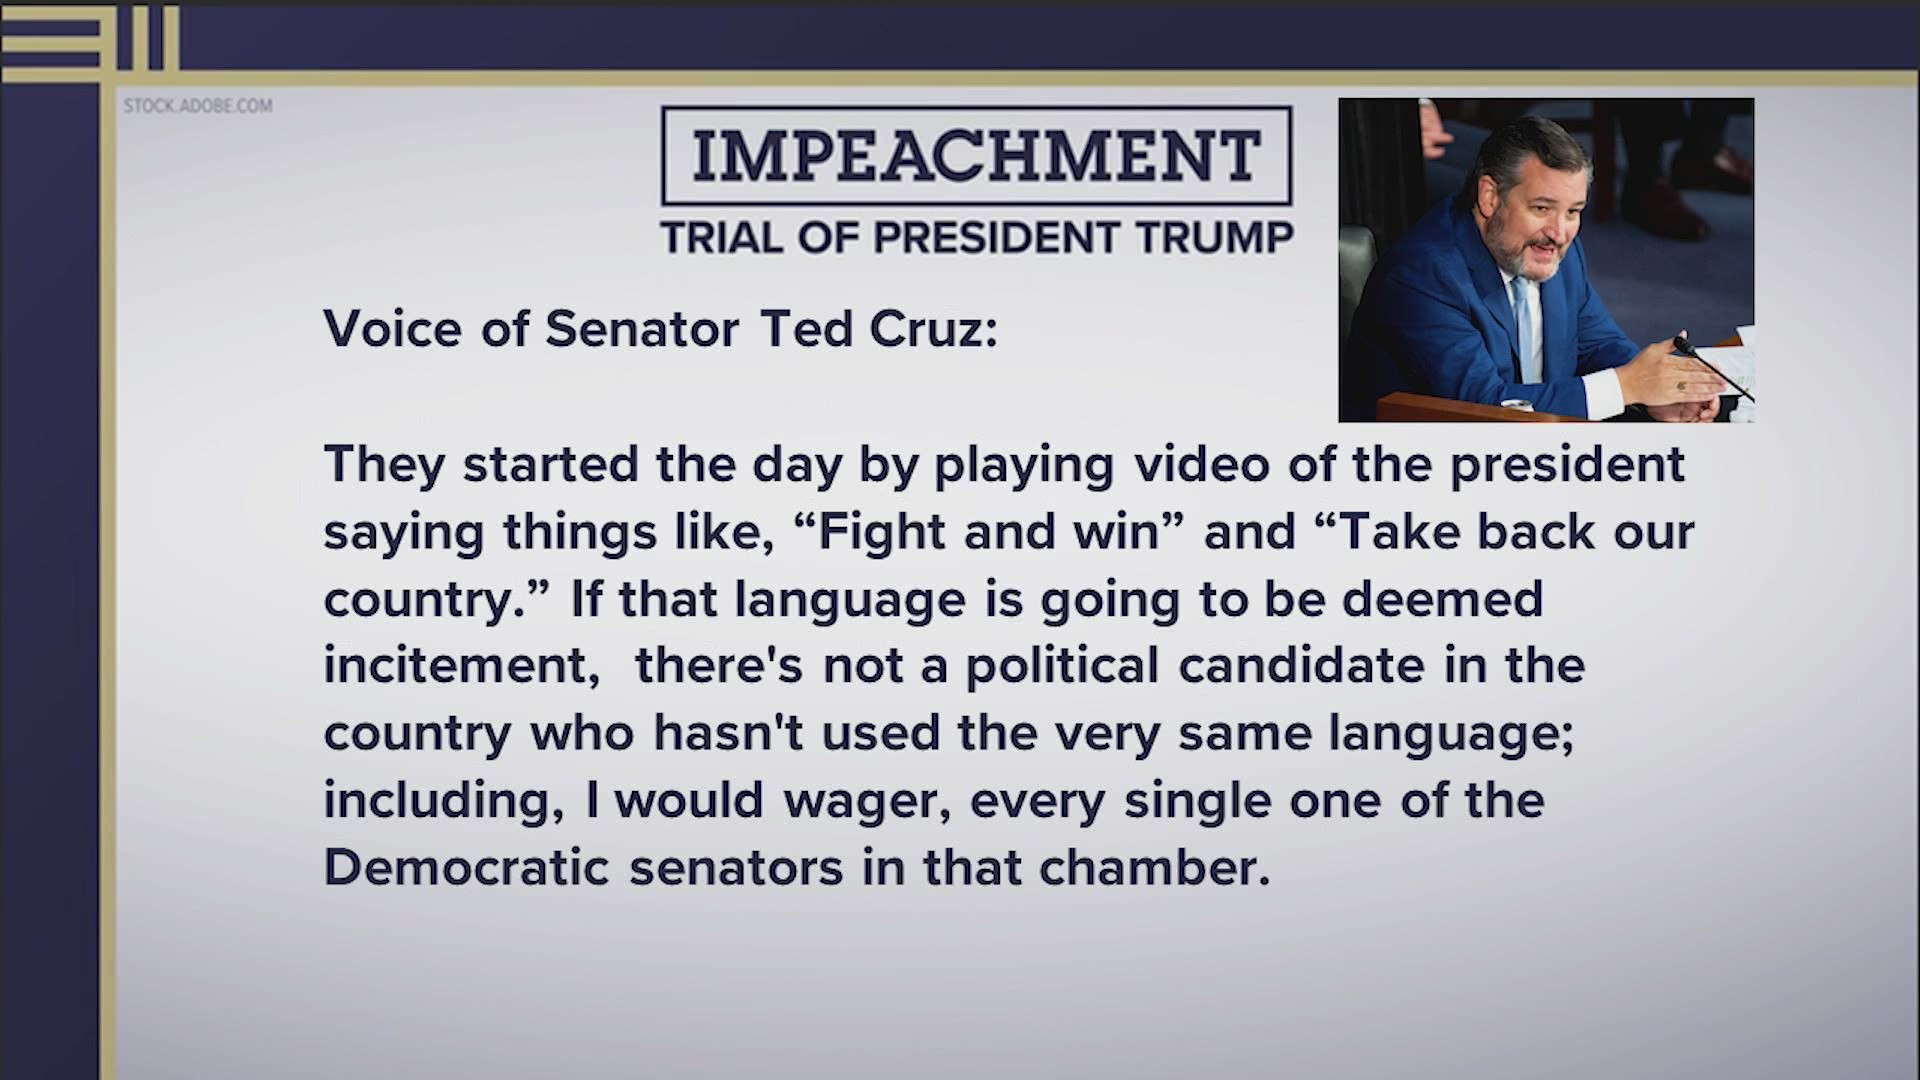 CBS News spoke with the Texas Senator after the second day of the impeachment hearing.